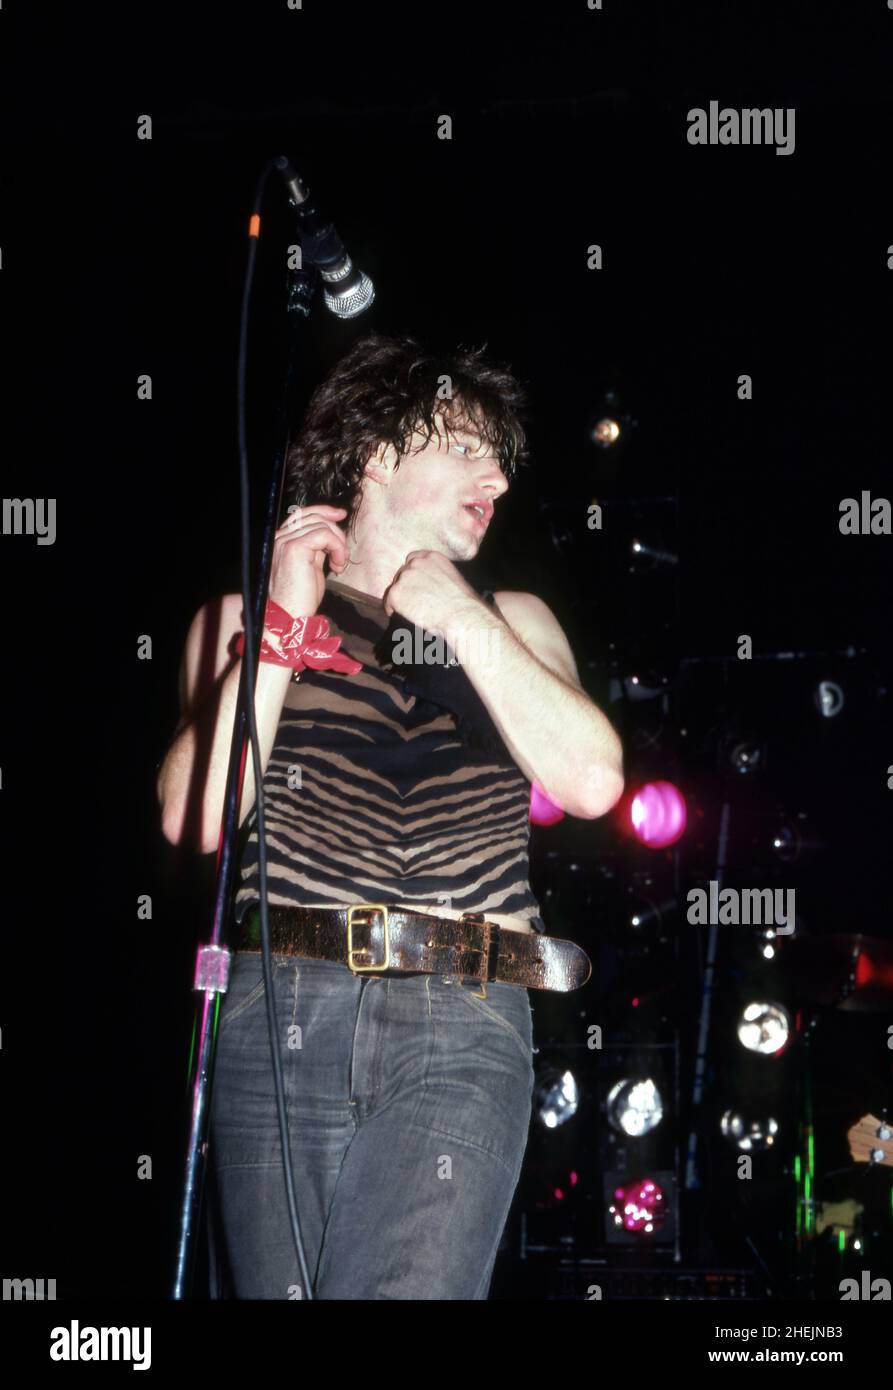 DETROIT - APRIL 18: Irish singer-songwriter, musician, businessman and philanthropist Bono, born Paul David Hewson and lead singer of U2, performs onstage at Harpo's during their Boy Tour, on April 18, 1981, in Detroit, Michigan. Credit: Ross Marino/Rock Negatives/MediaPunch Stock Photo